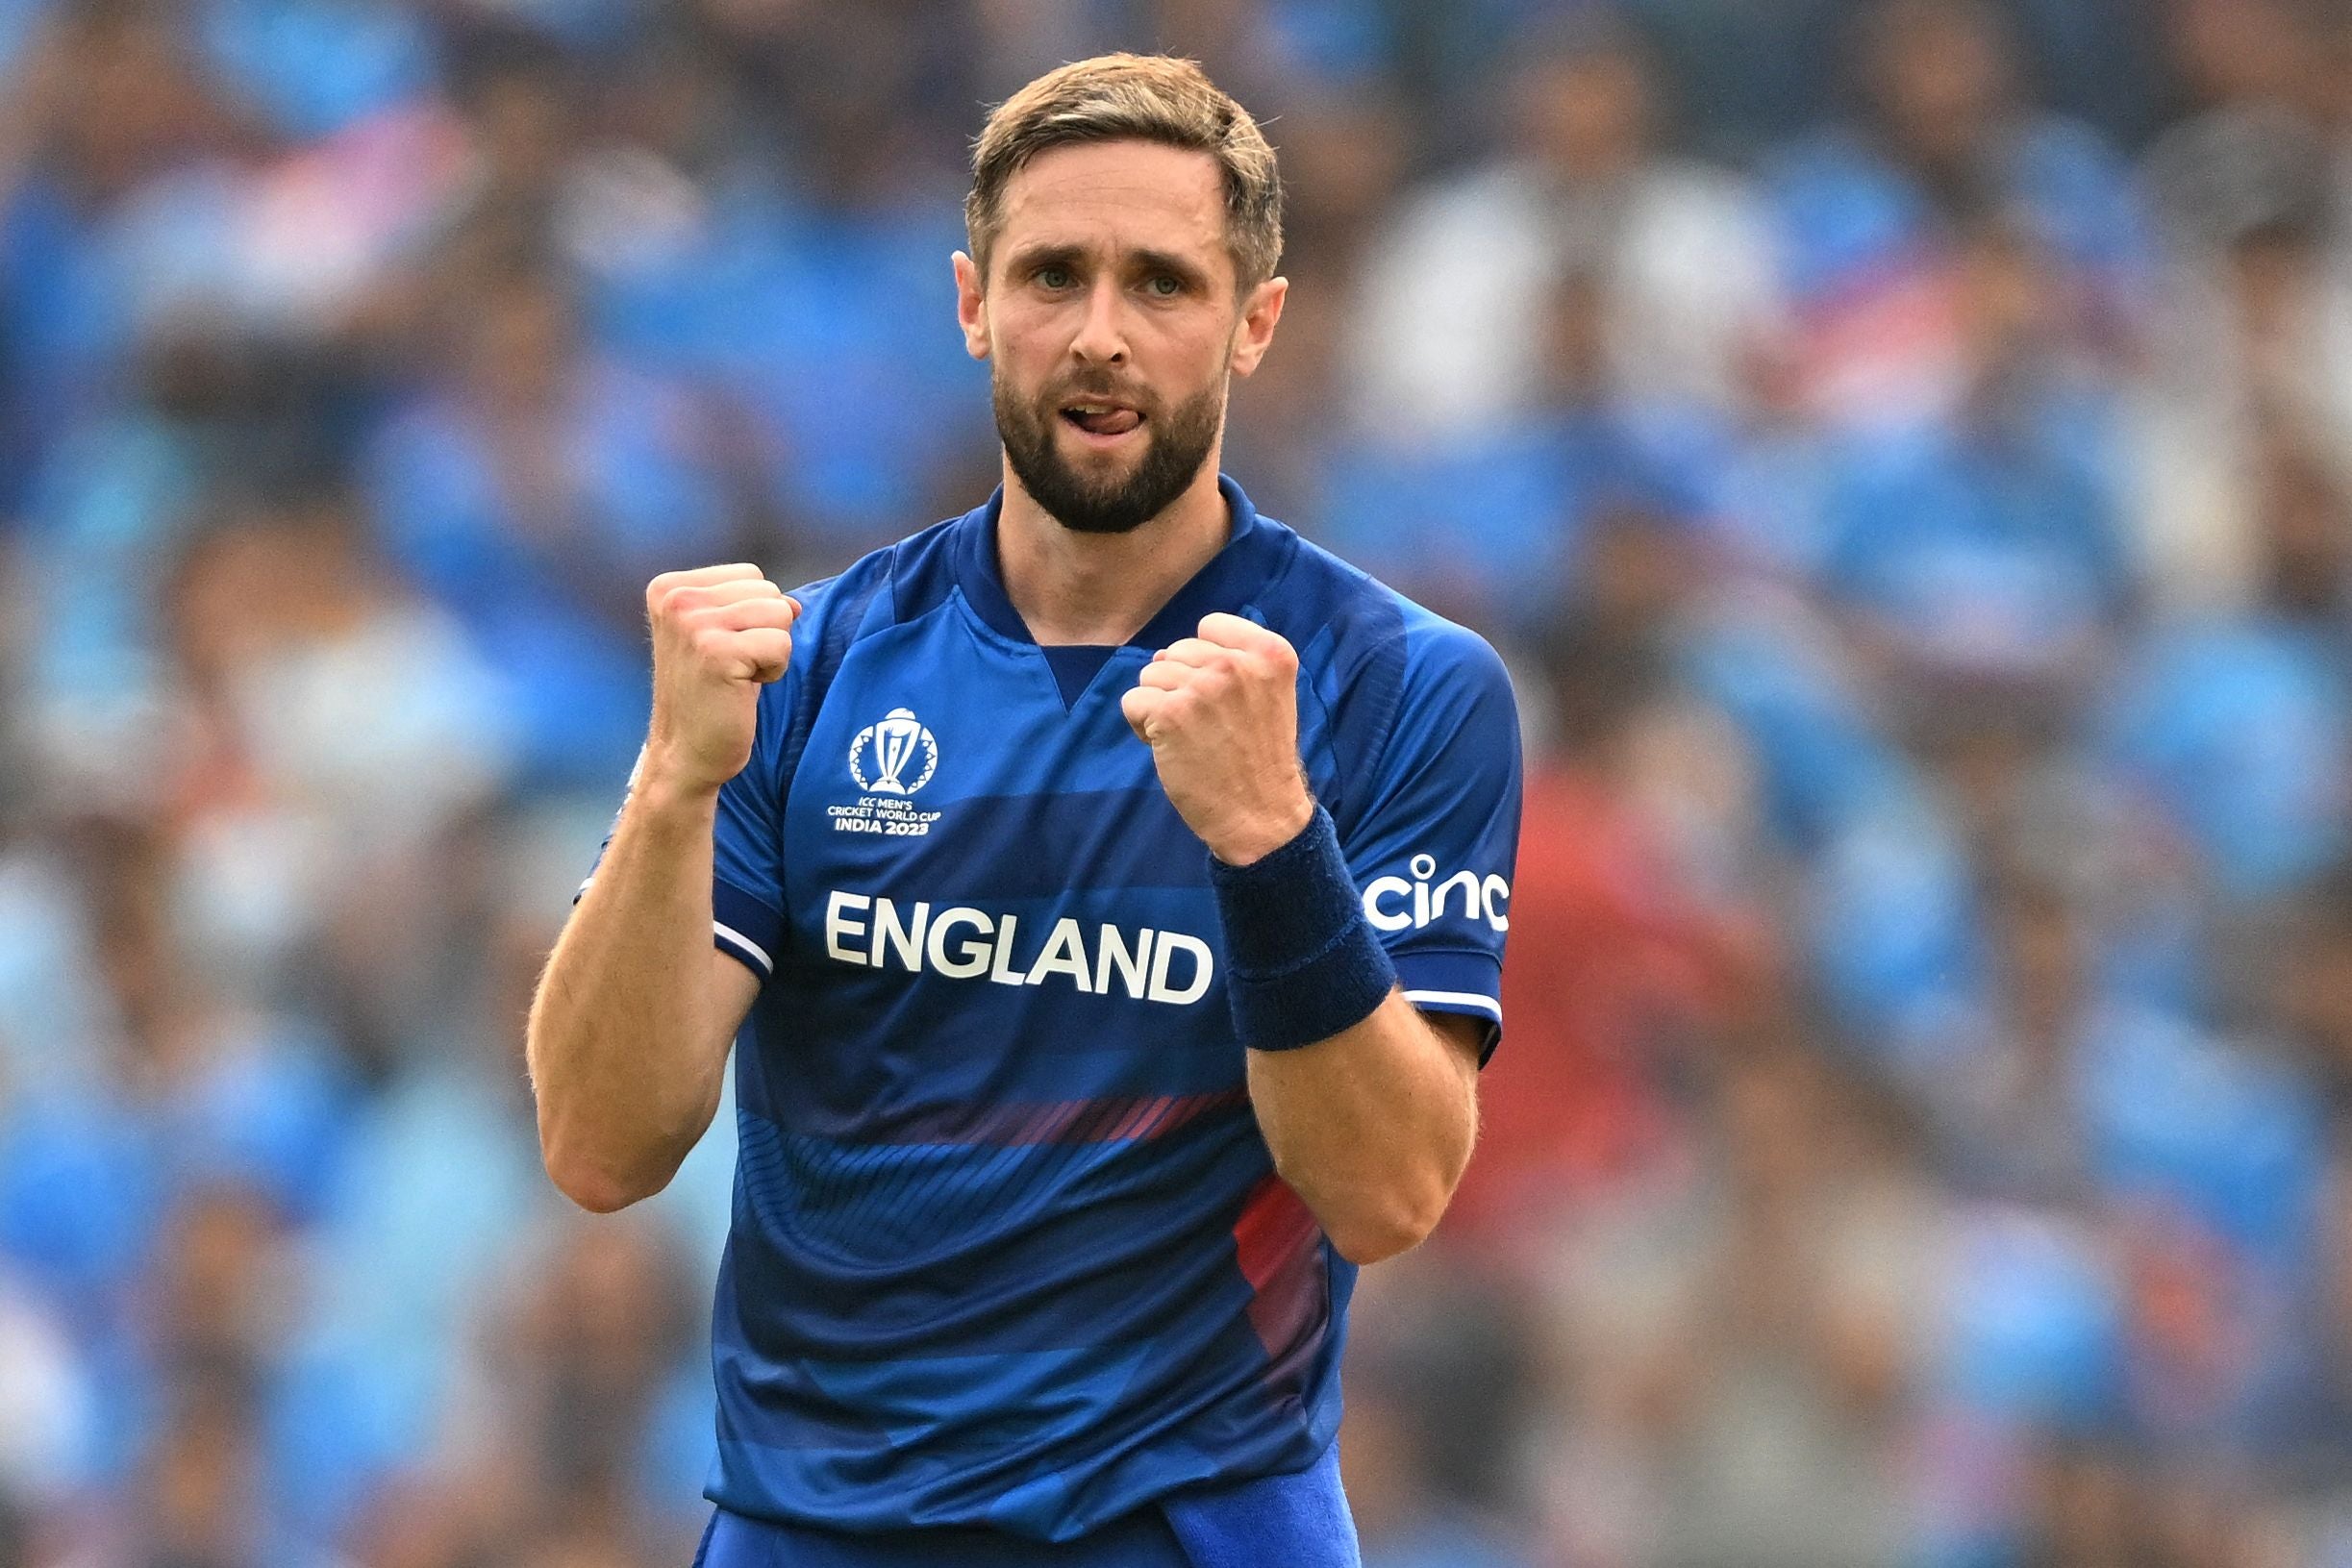 Chris Woakes returned to form against India